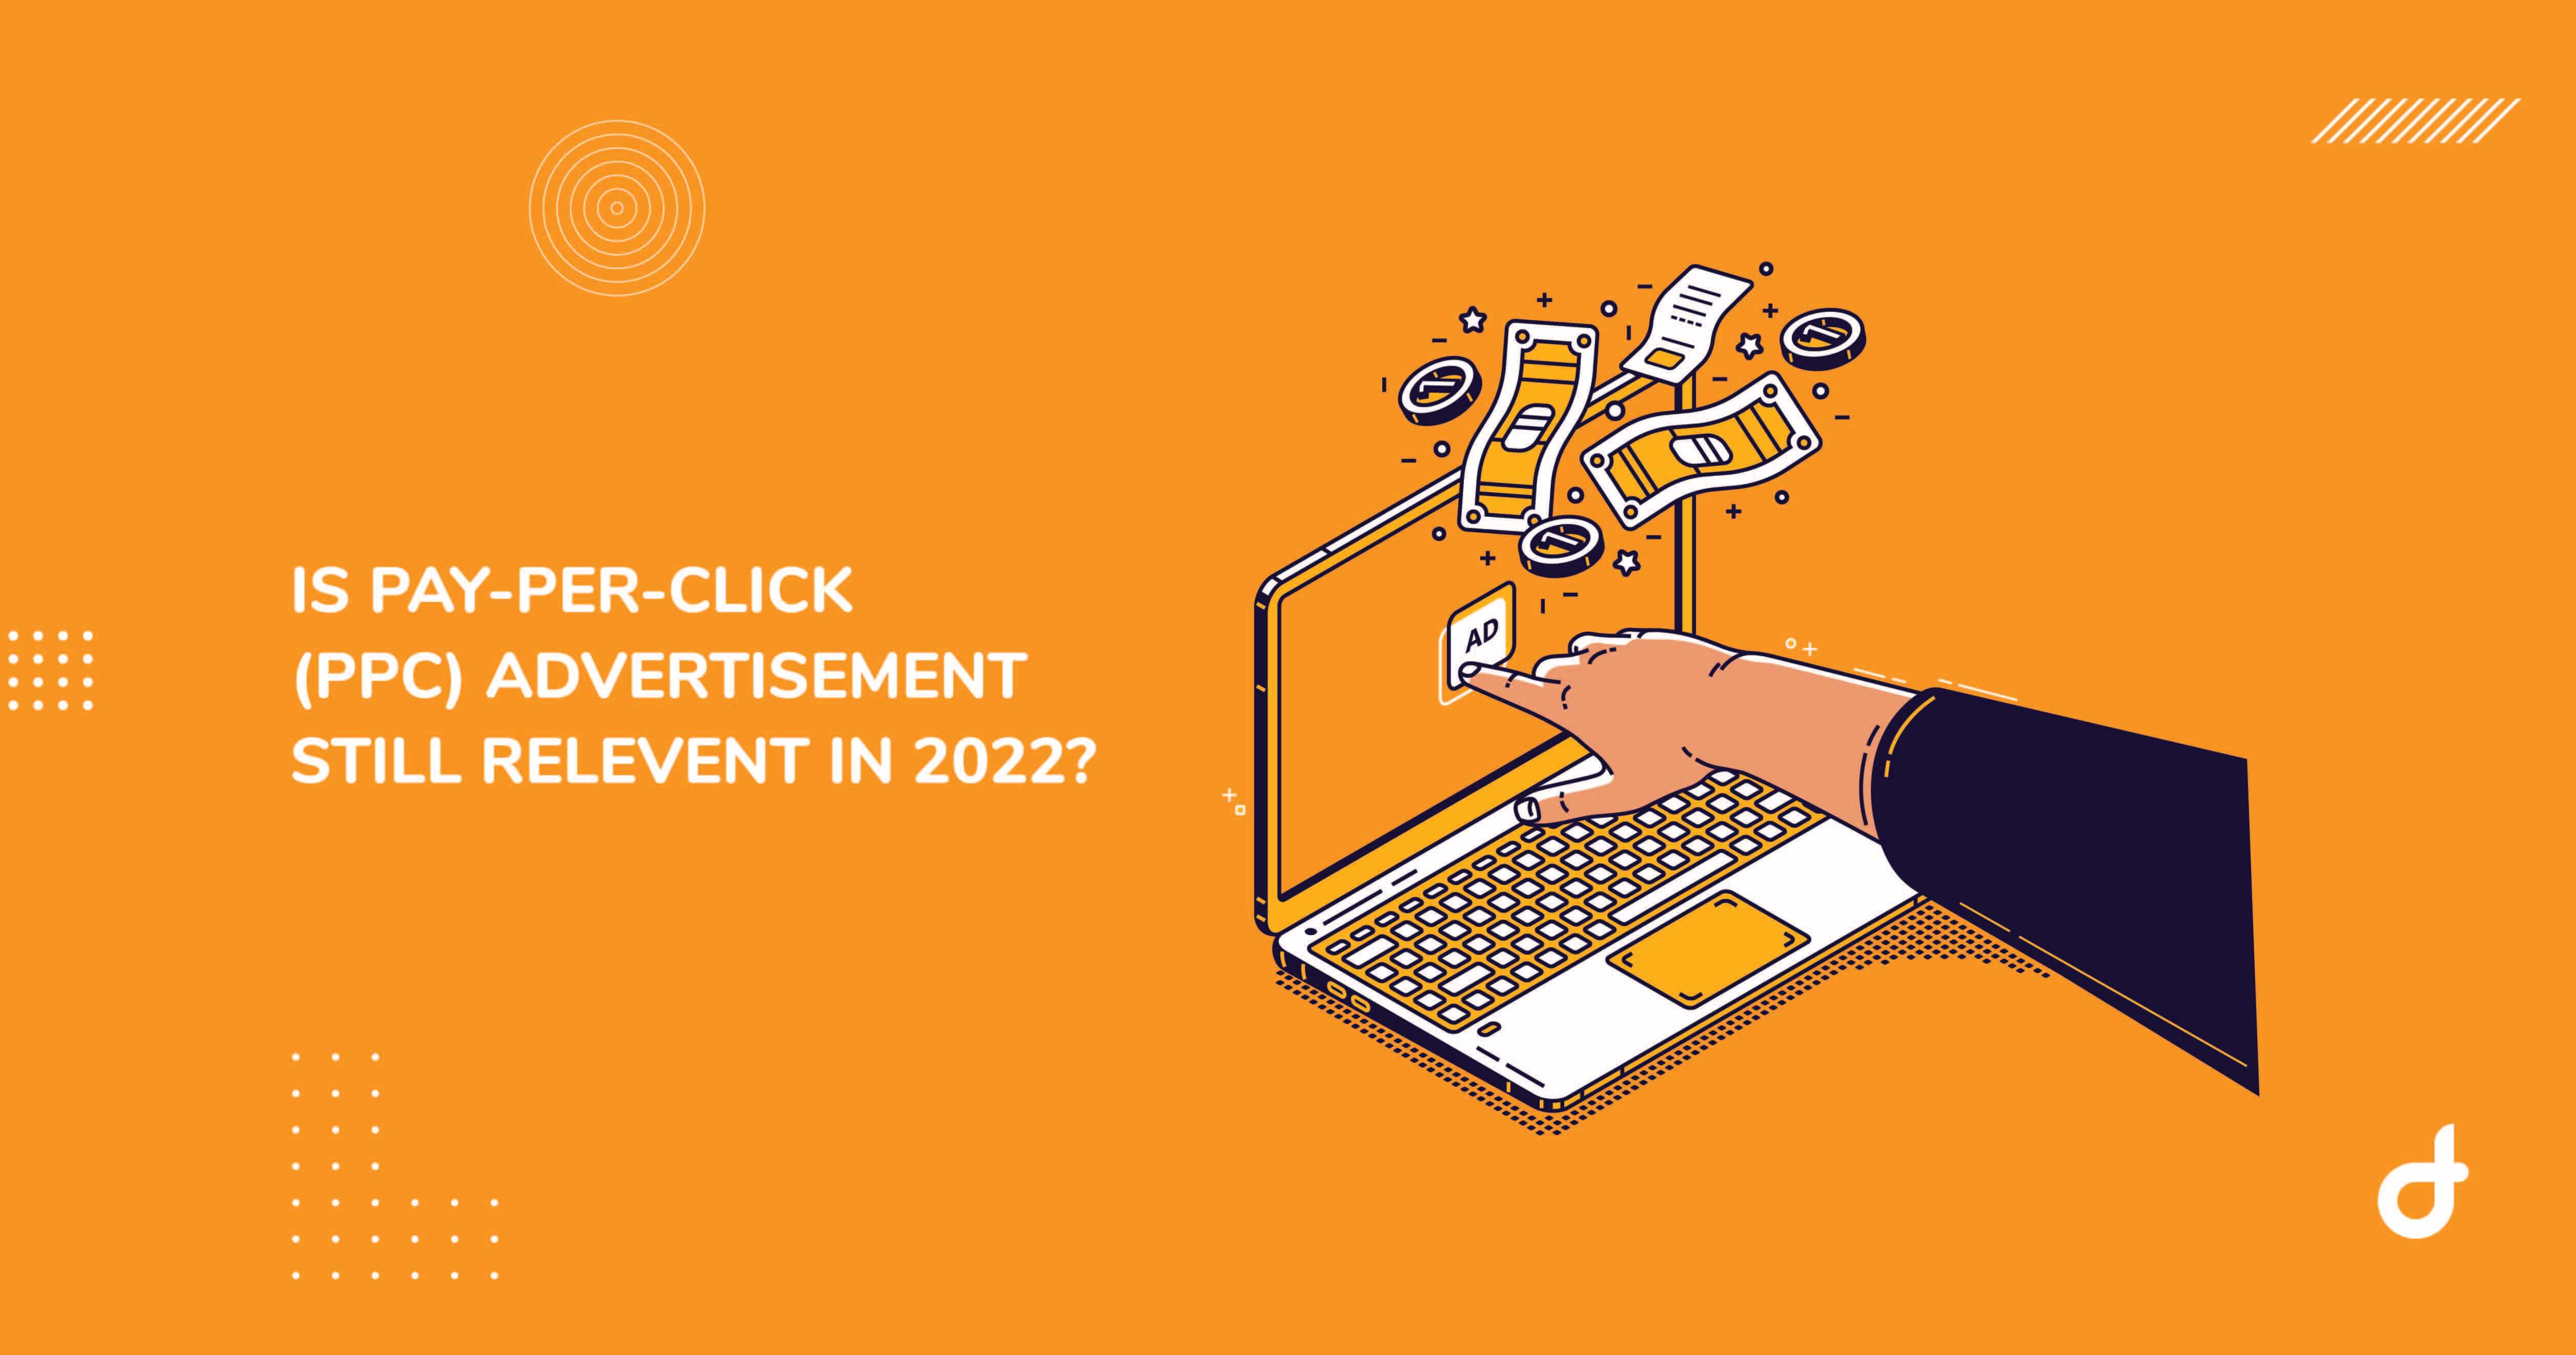 is ppc advertisement still relevant in 2022?